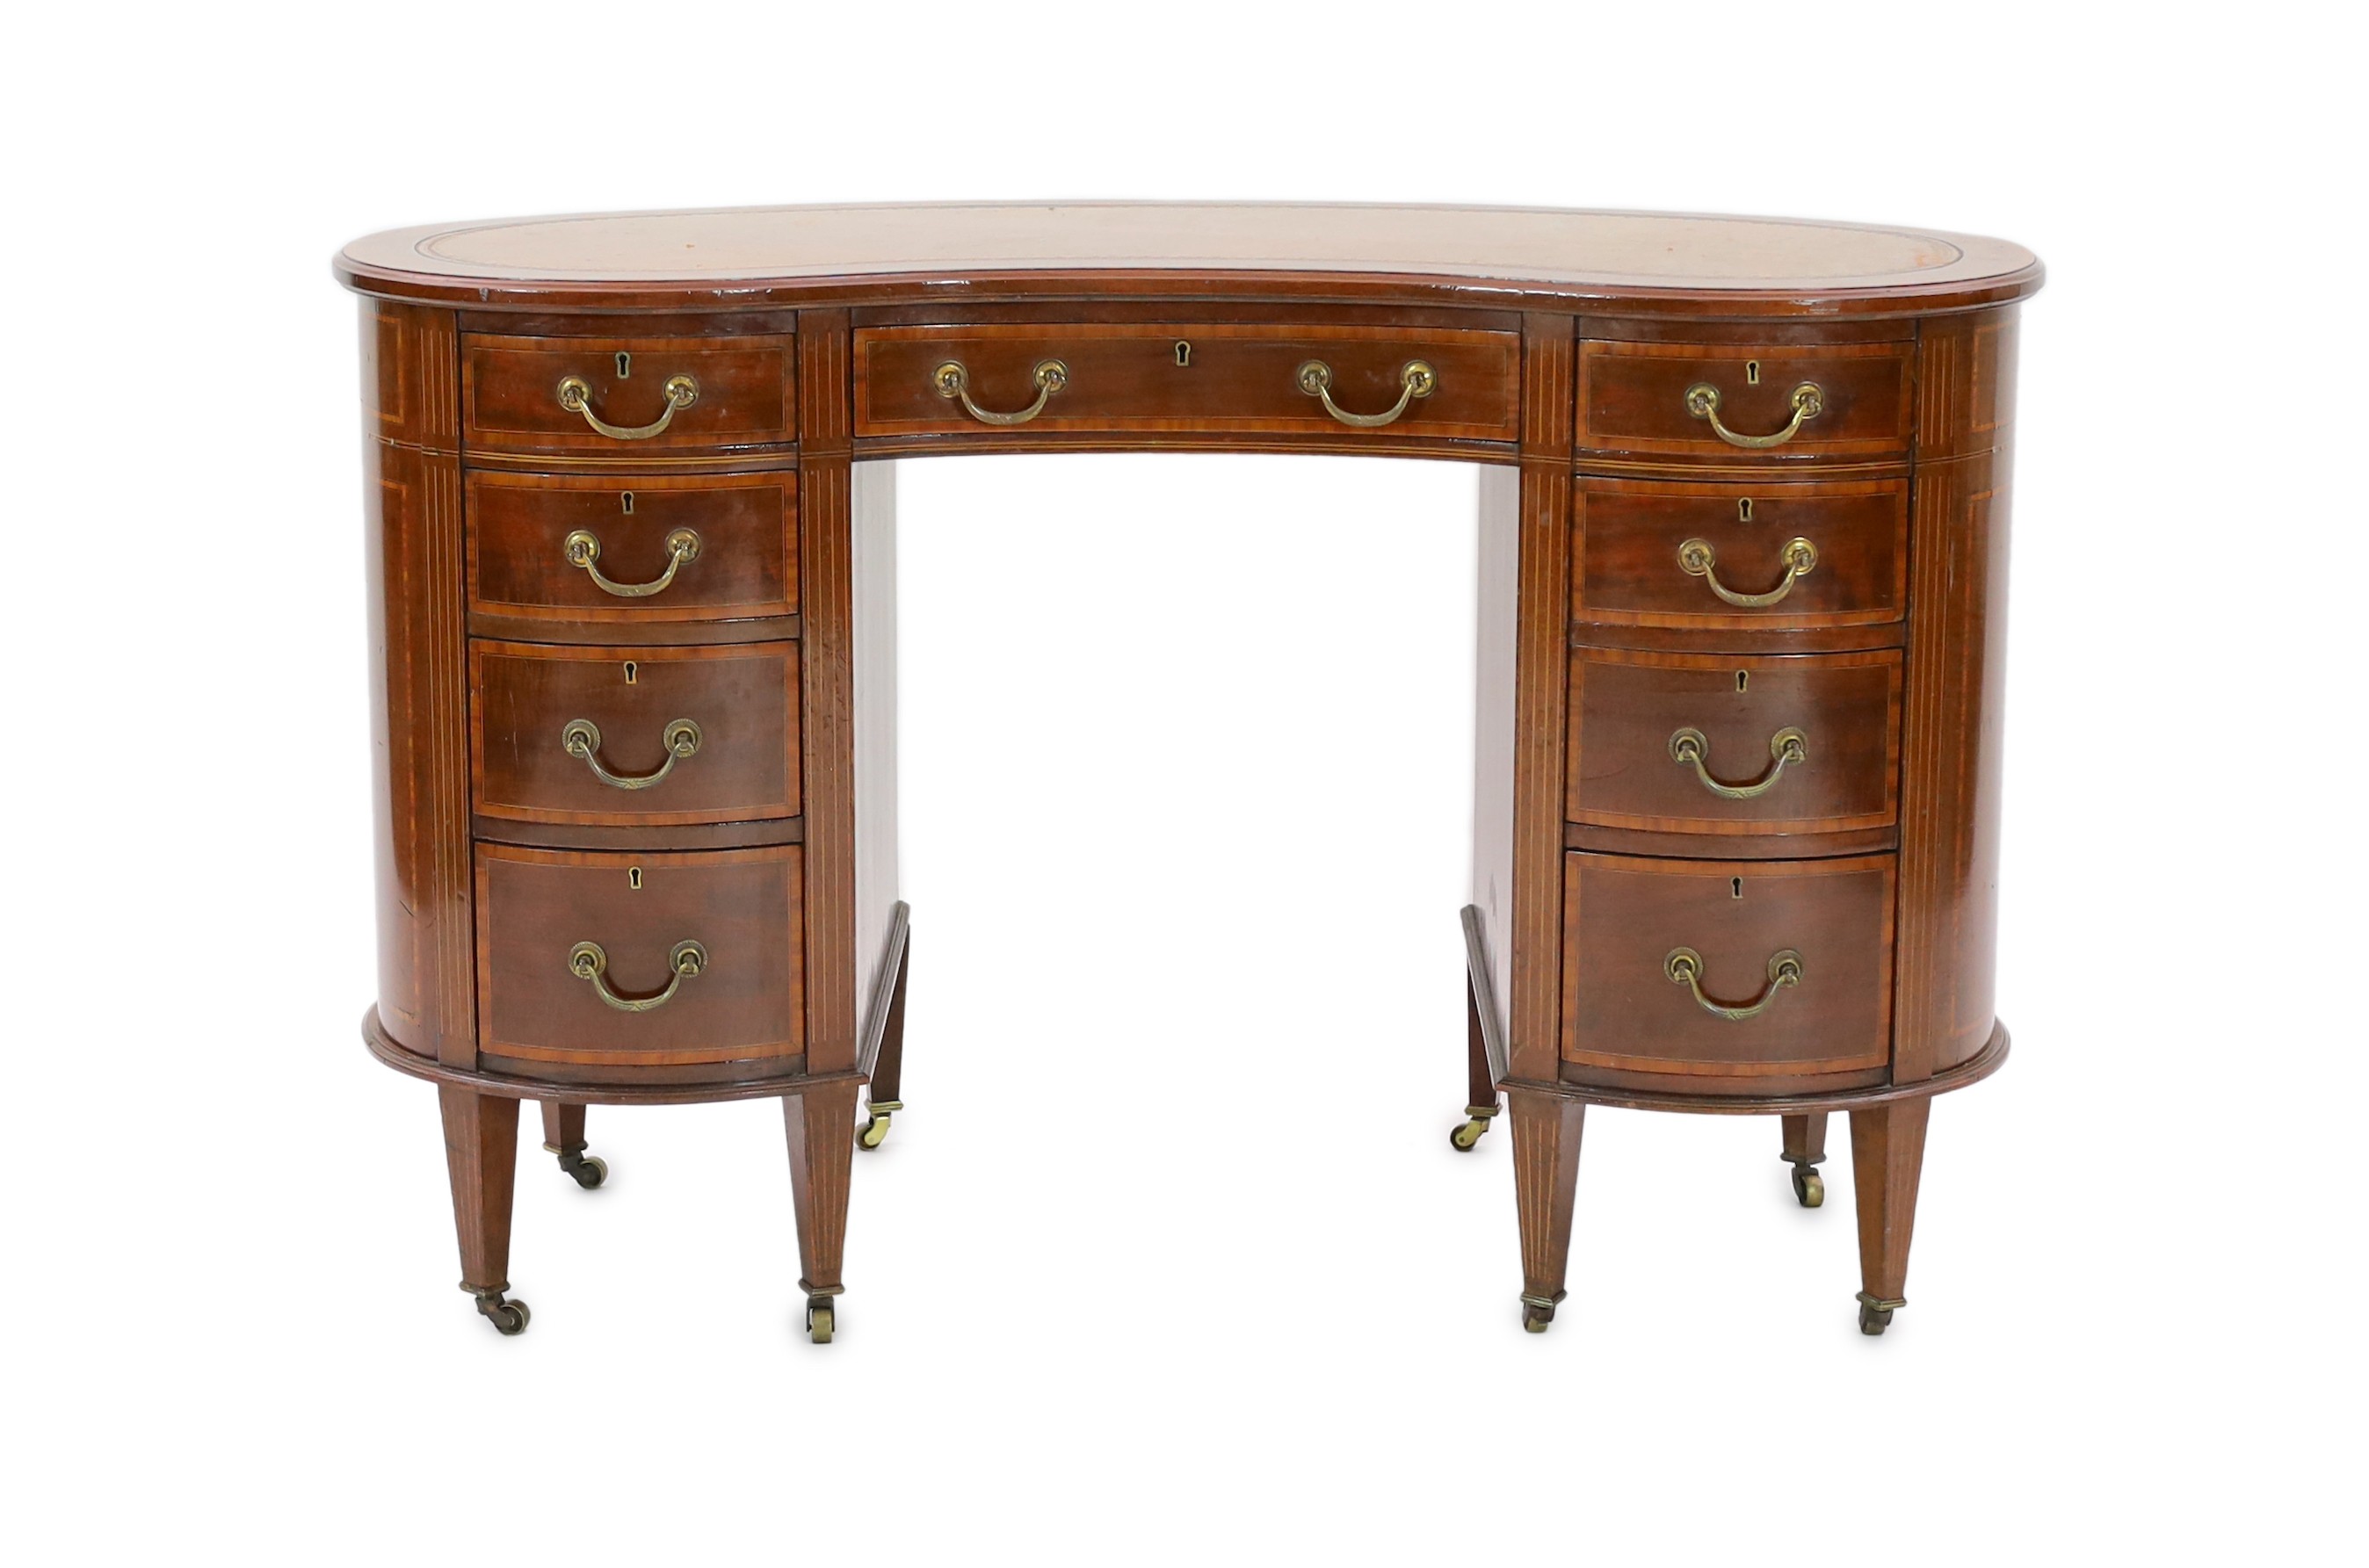 An Edwardian satinwood banded mahogany kidney shaped kneehole desk, with brown skiver and